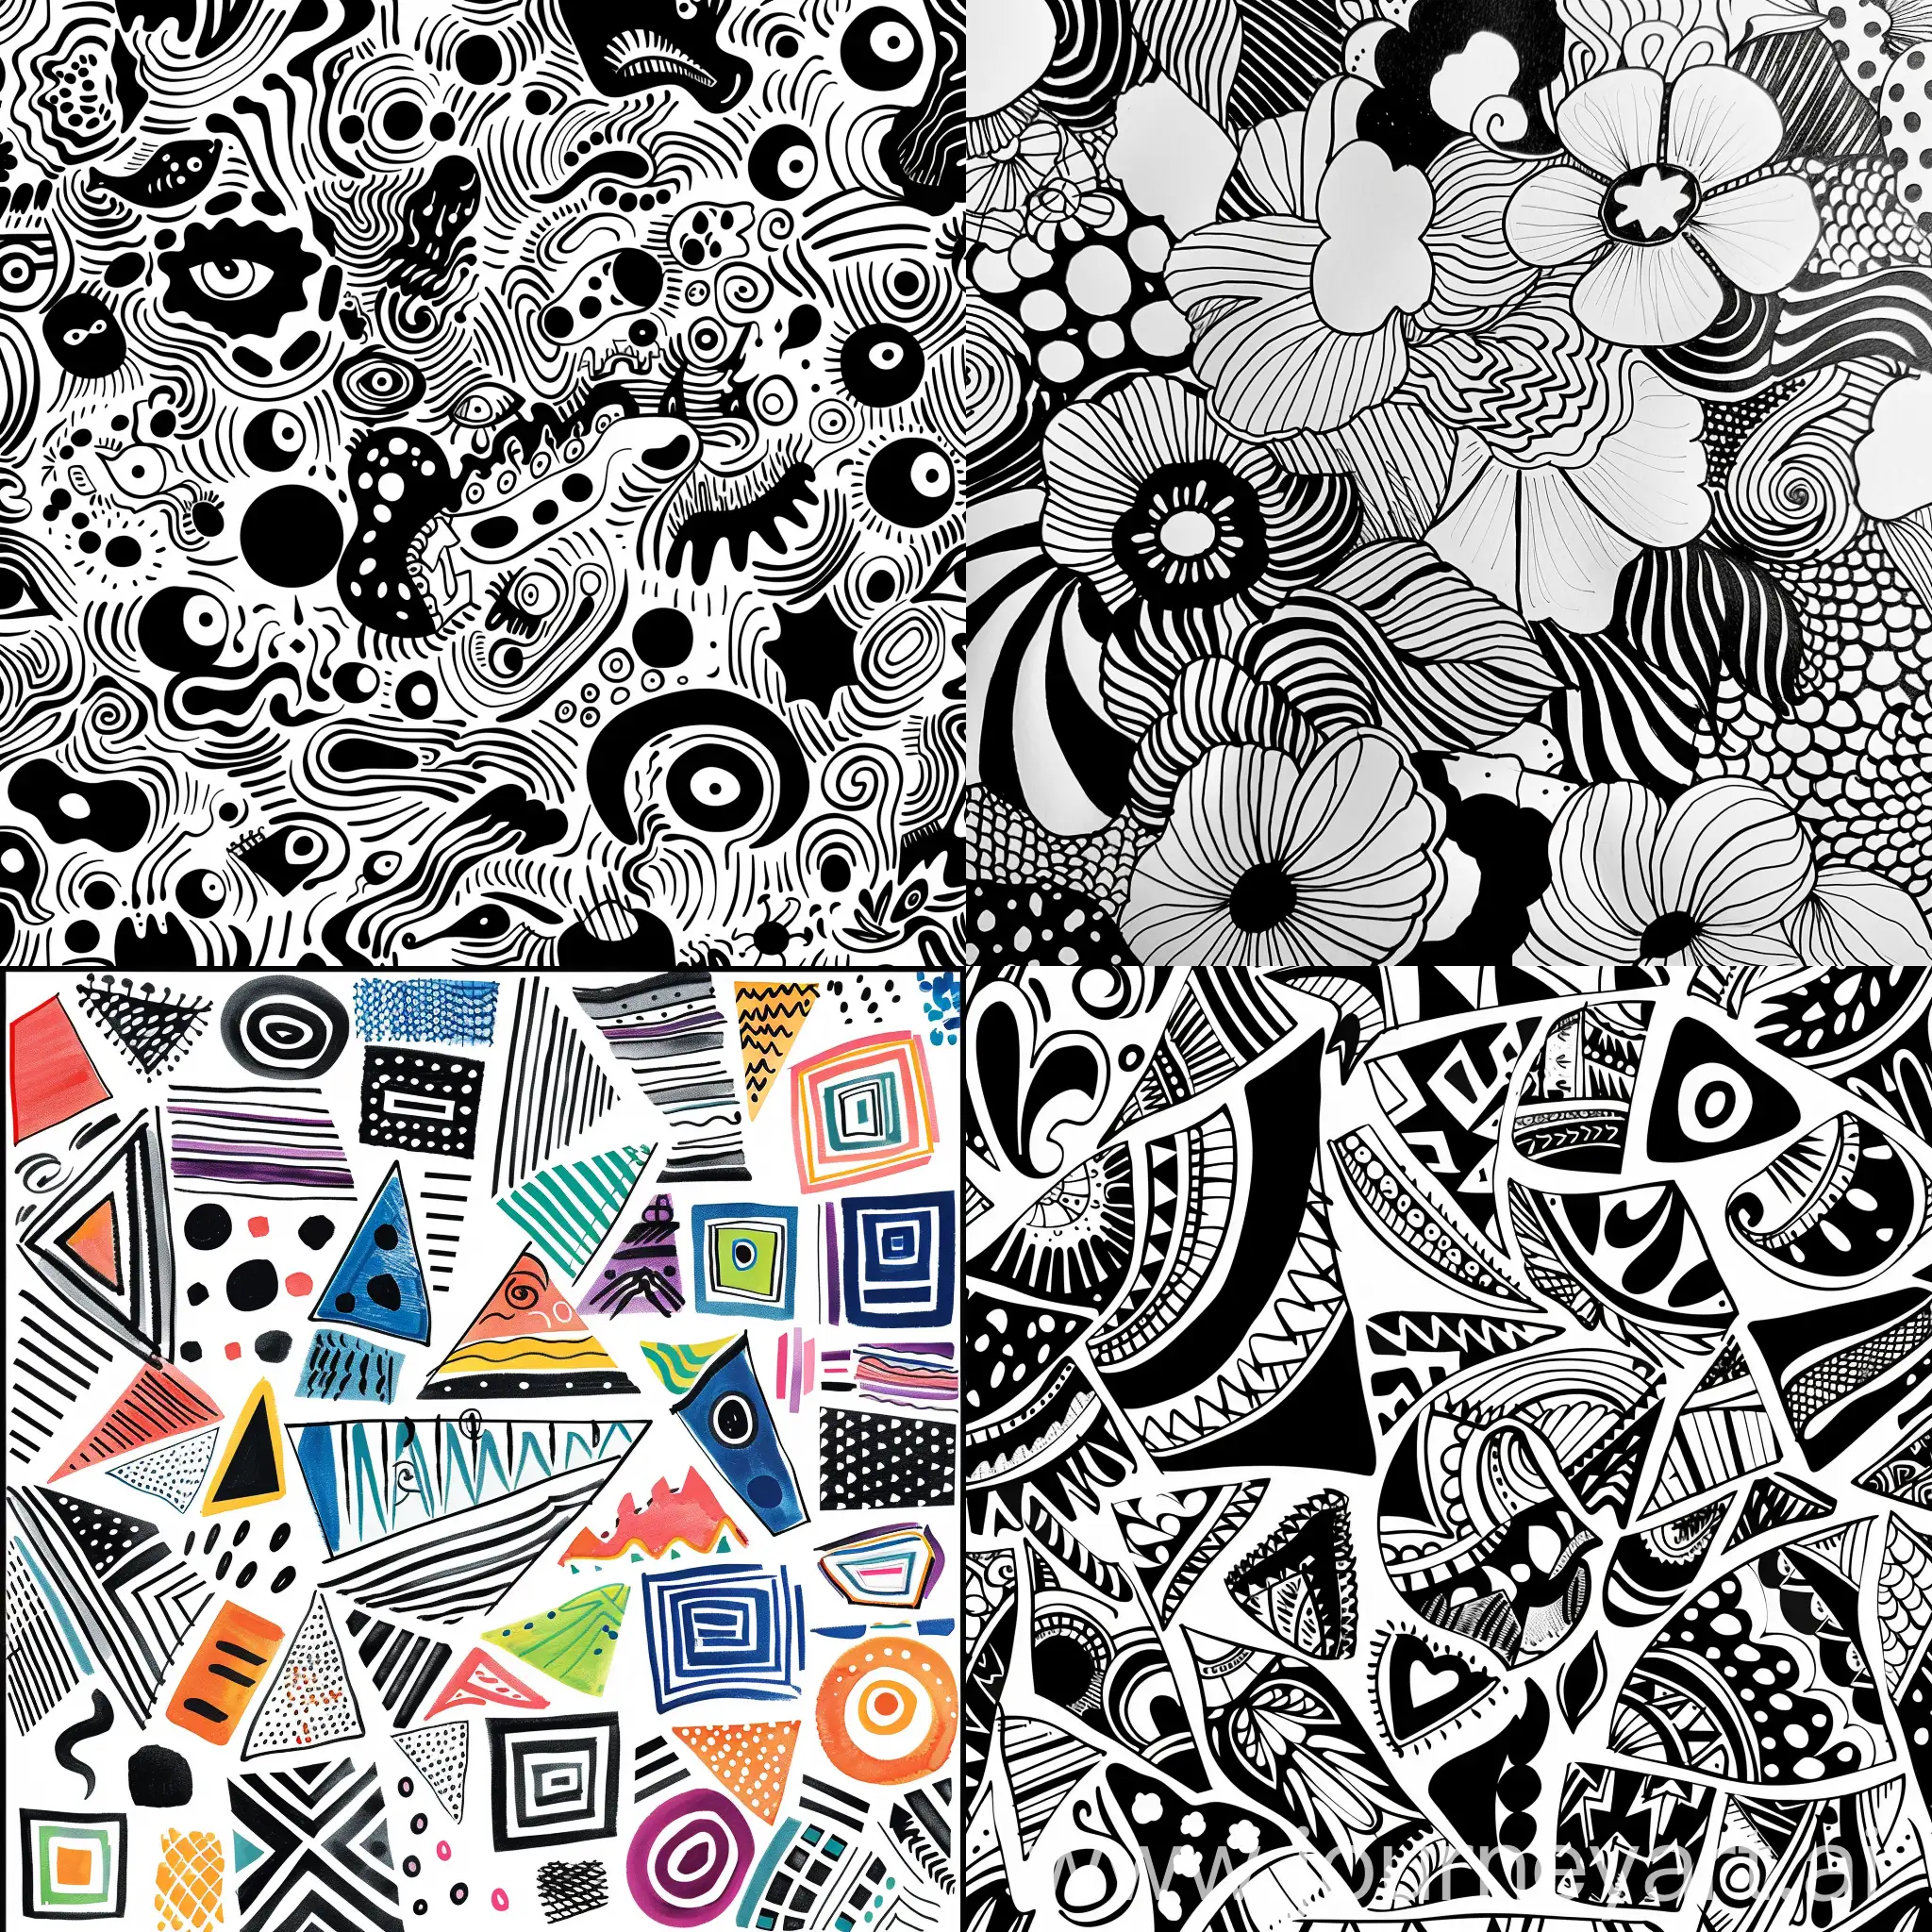 Abstract-Doodle-Patterns-on-White-Background